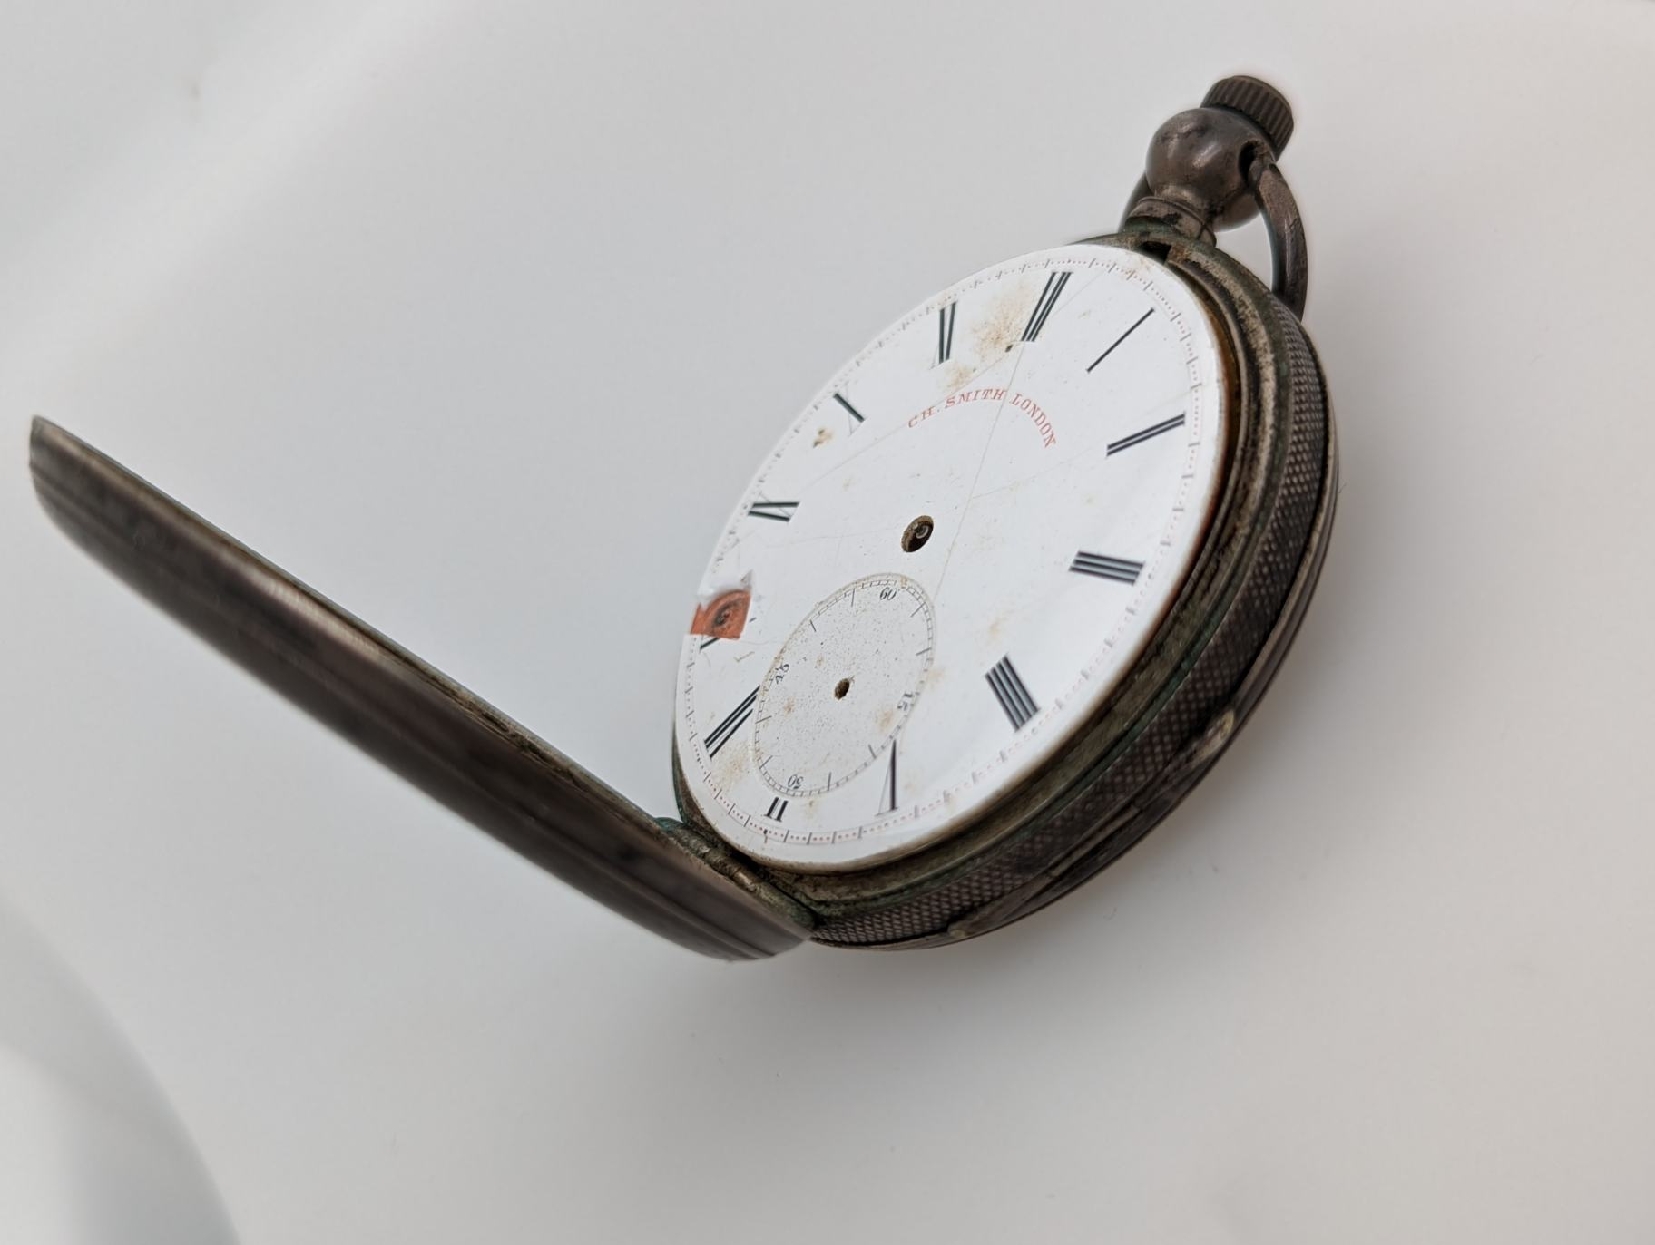 Antique Non-Functioning Silver Pocketwatch with Engraving Inside